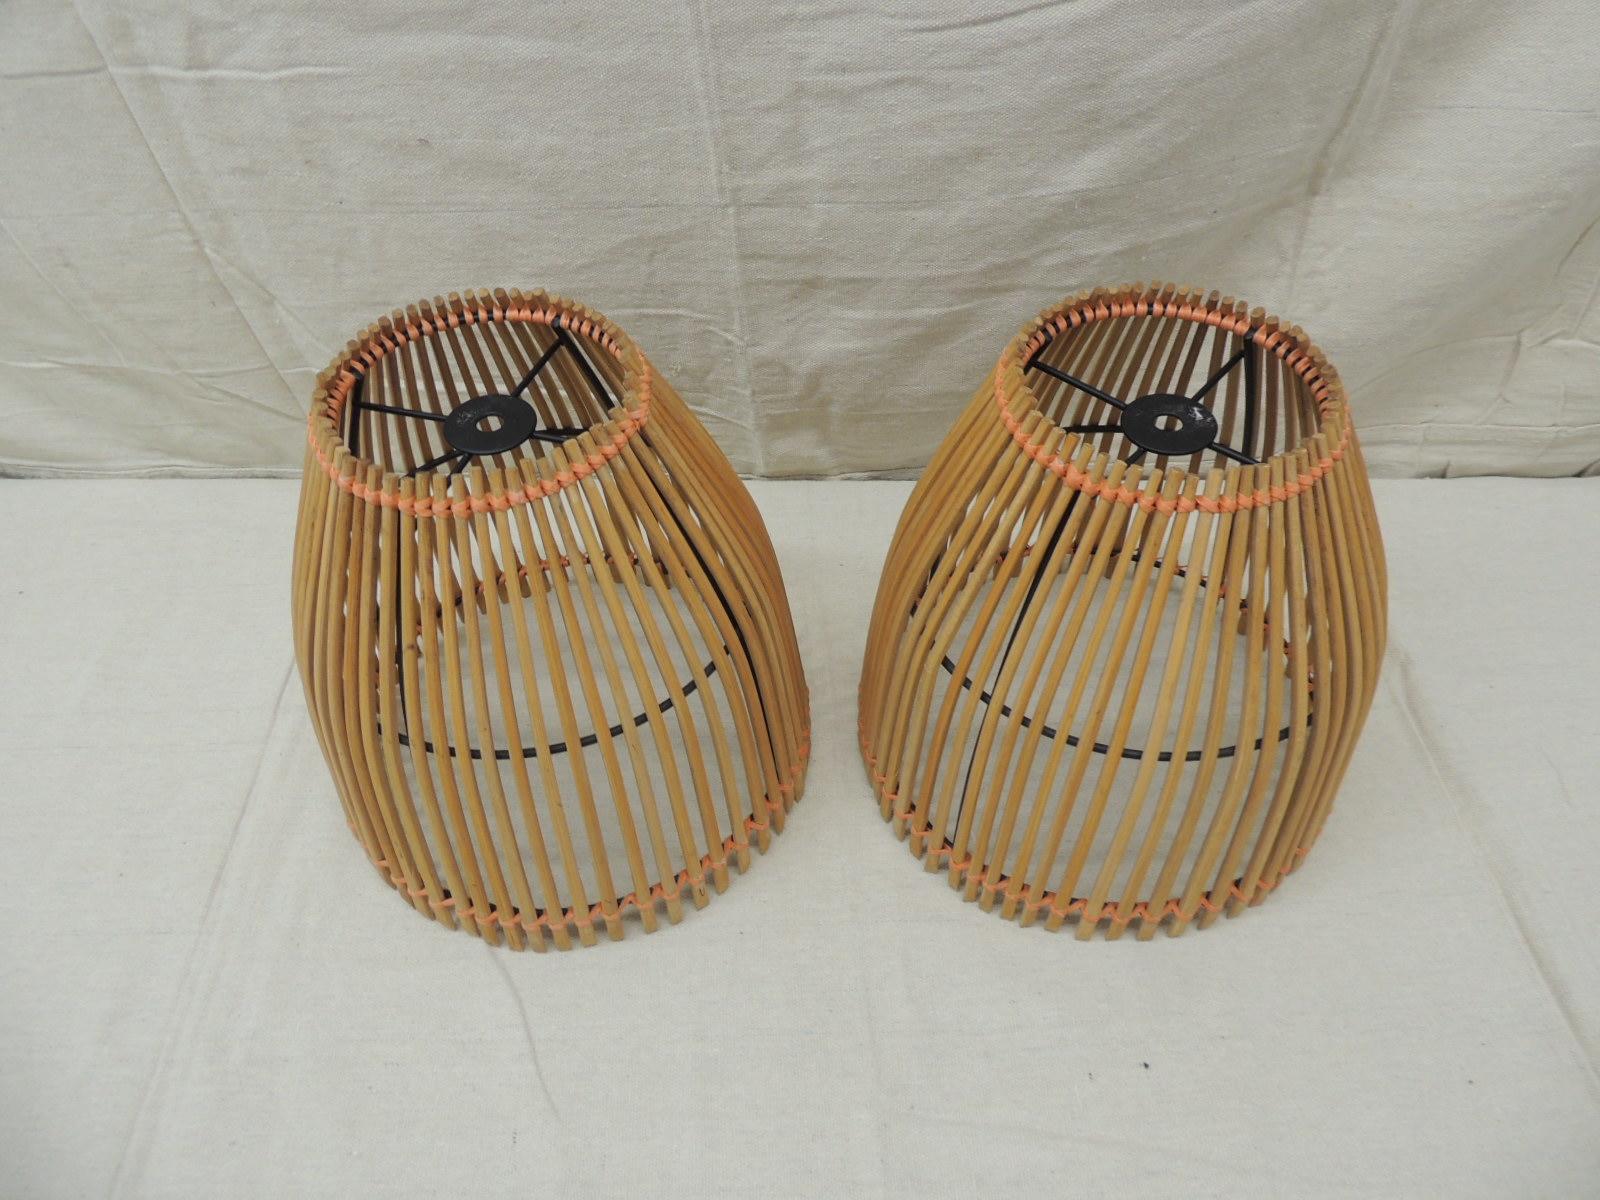 Pair of bamboo matchsticks lampshades
with woven details on iron frames.
Size: 4.3/4